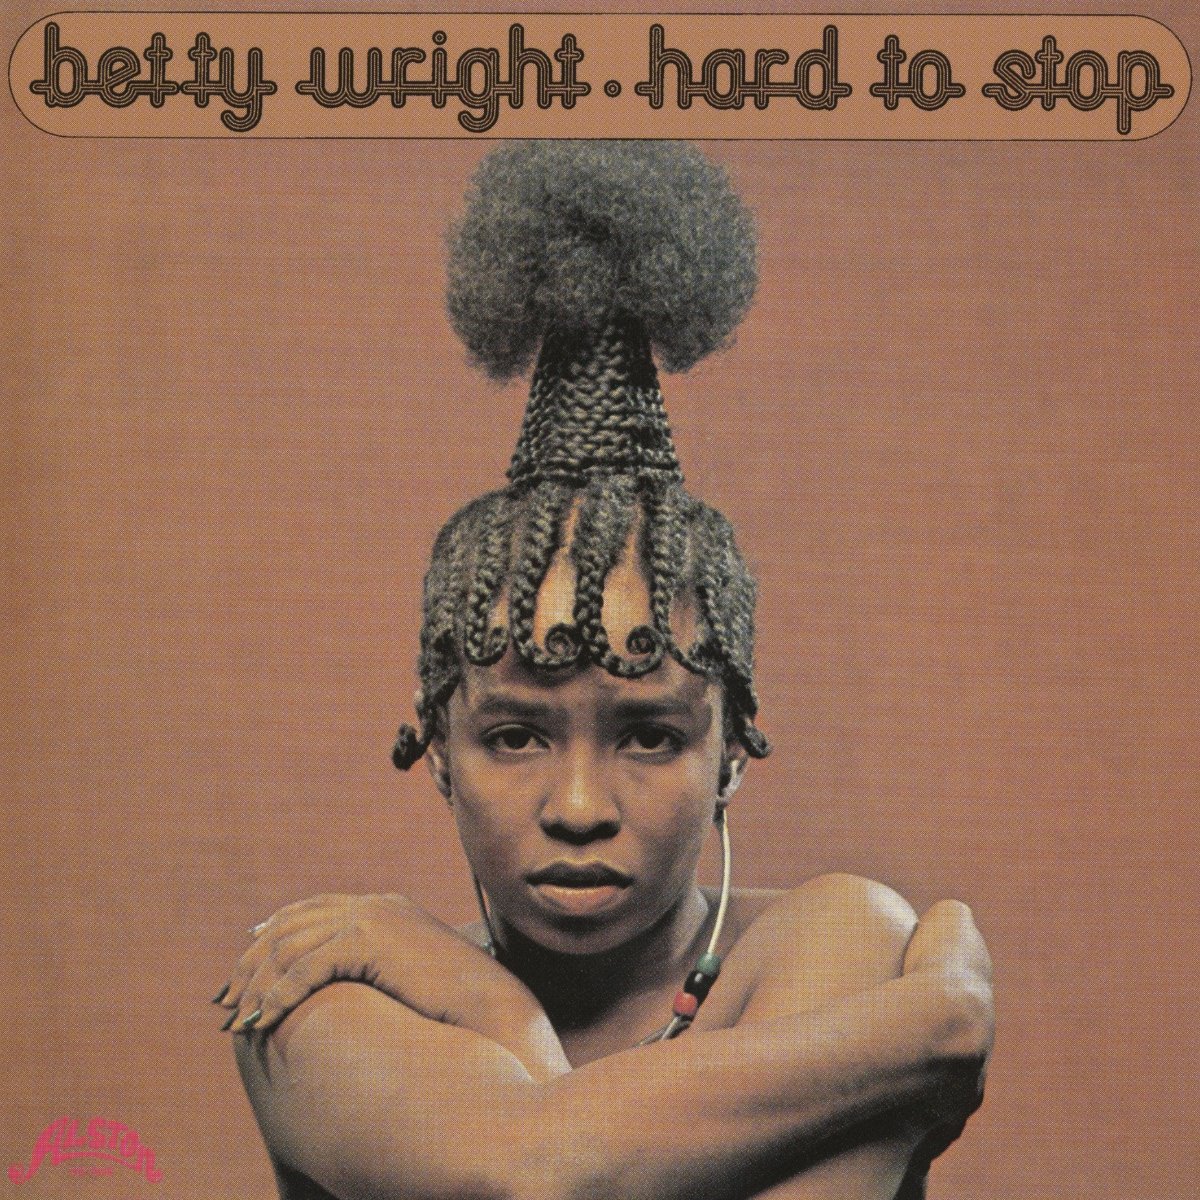 CD Shop - WRIGHT, BETTY HARD TO STOP